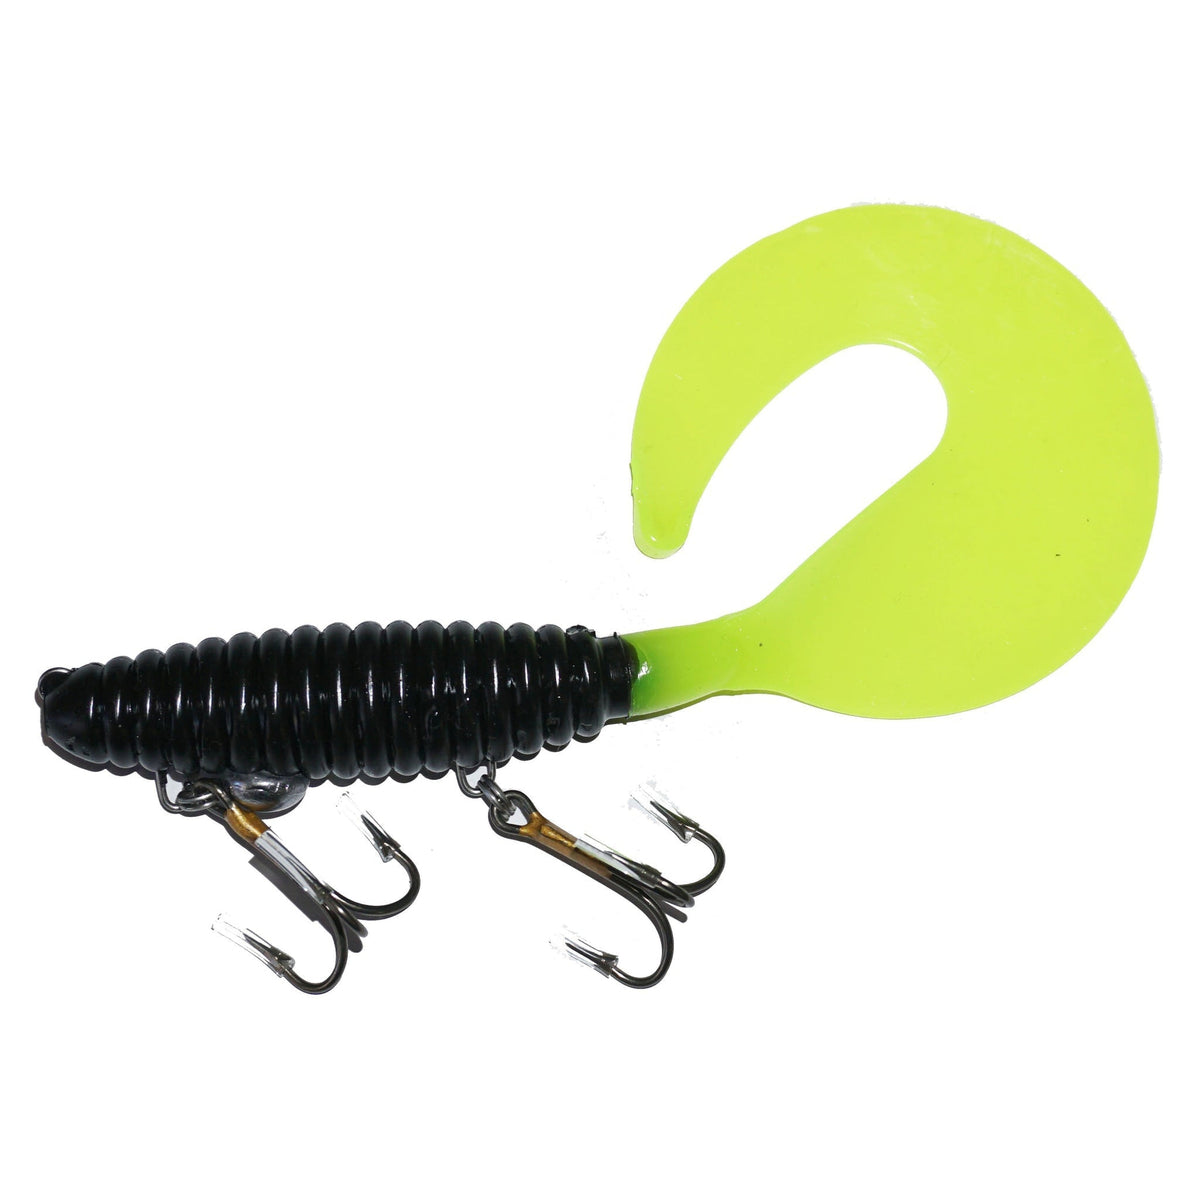 View of Rubber Whale Tail Plastics 8" Black / Lemon Tail available at EZOKO Pike and Musky Shop